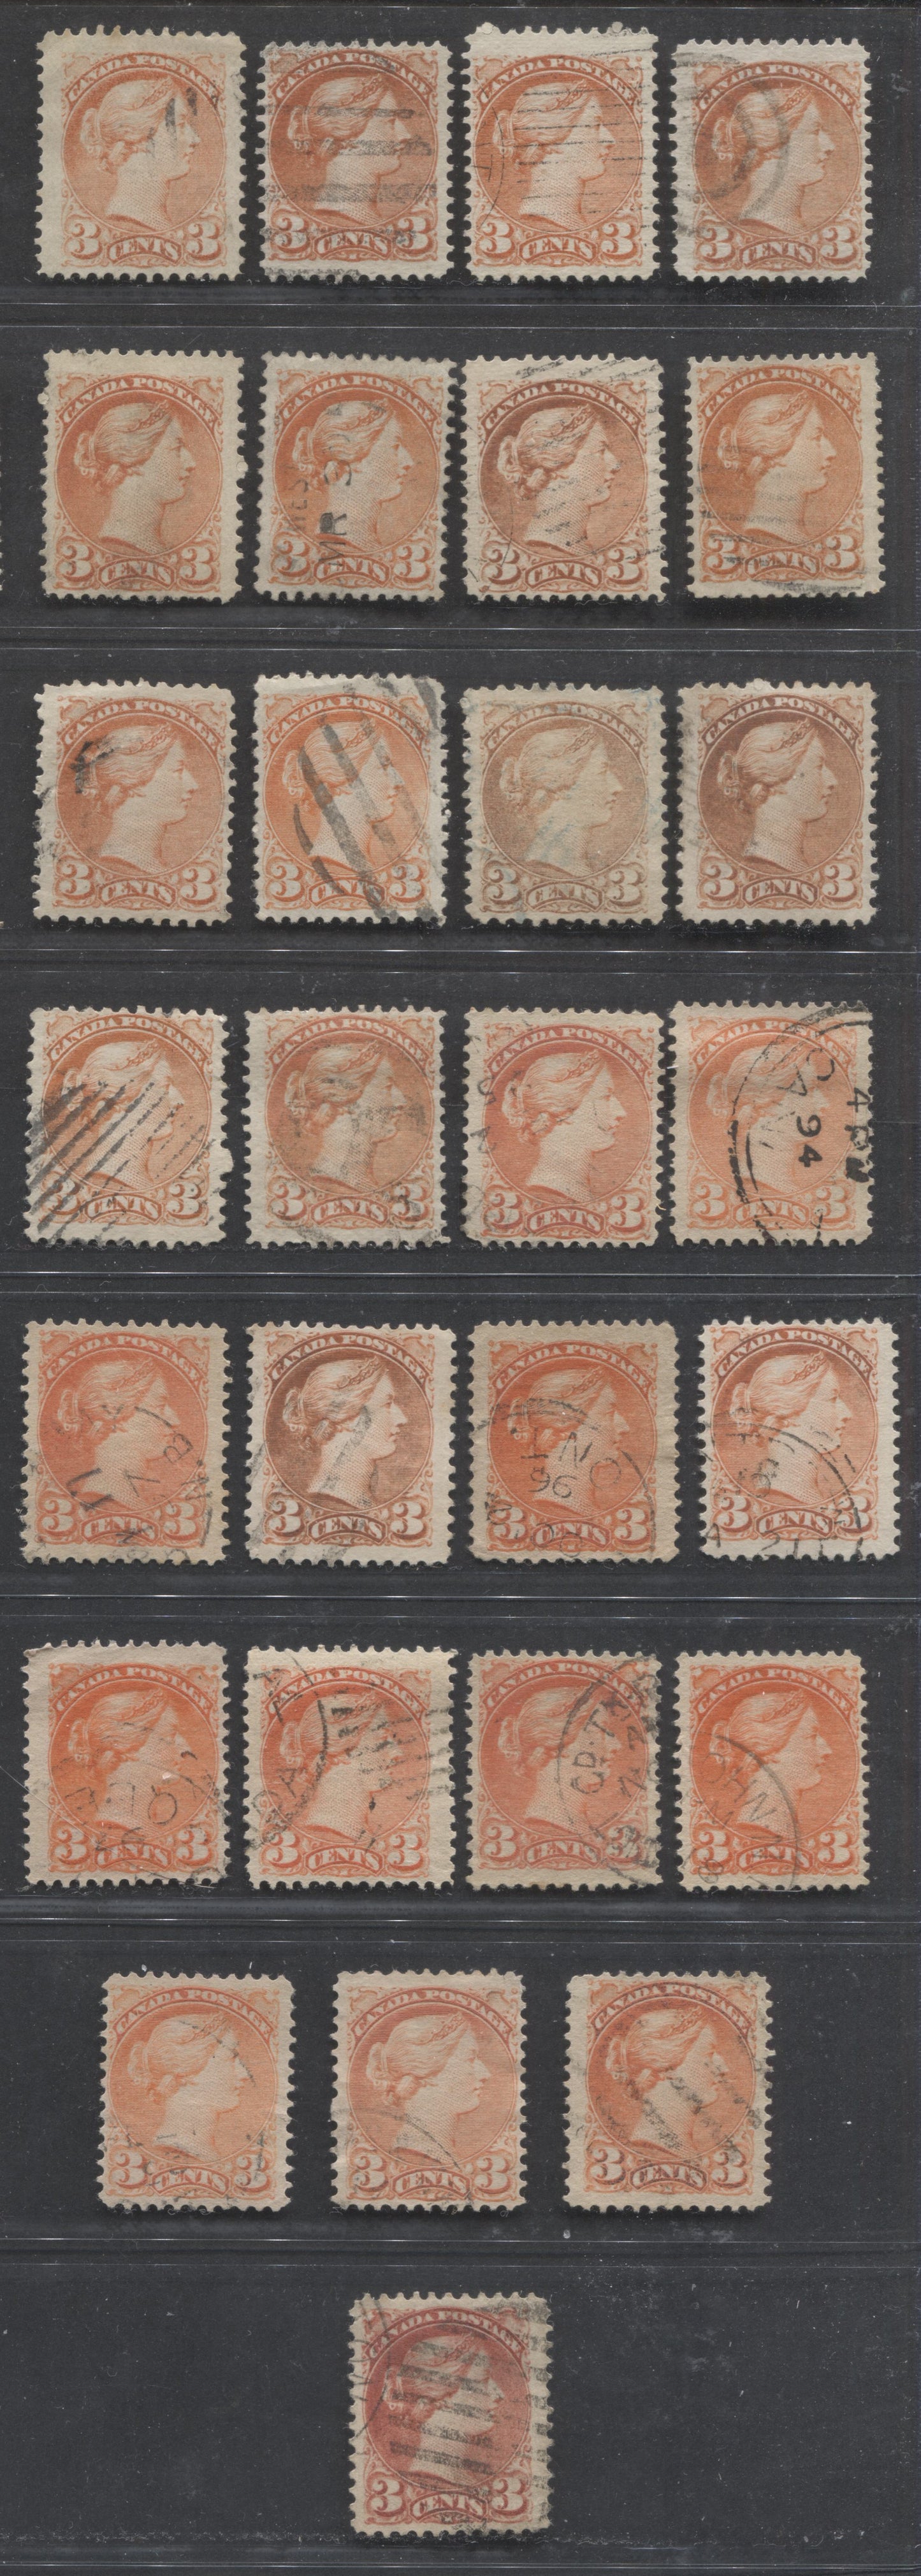 Lot 229 Canada #37, 37ii, 37iii, 41, 41i 3c Dull red, Orange Red, Vermilion & Deep Rose Carmine Queen Victoria, 1870-1897 Small Queen Issue, 28 Fine Used Singles, Montreal & 2nd Ottawa Printings, Including the Scarce Deep Rose Carmine,